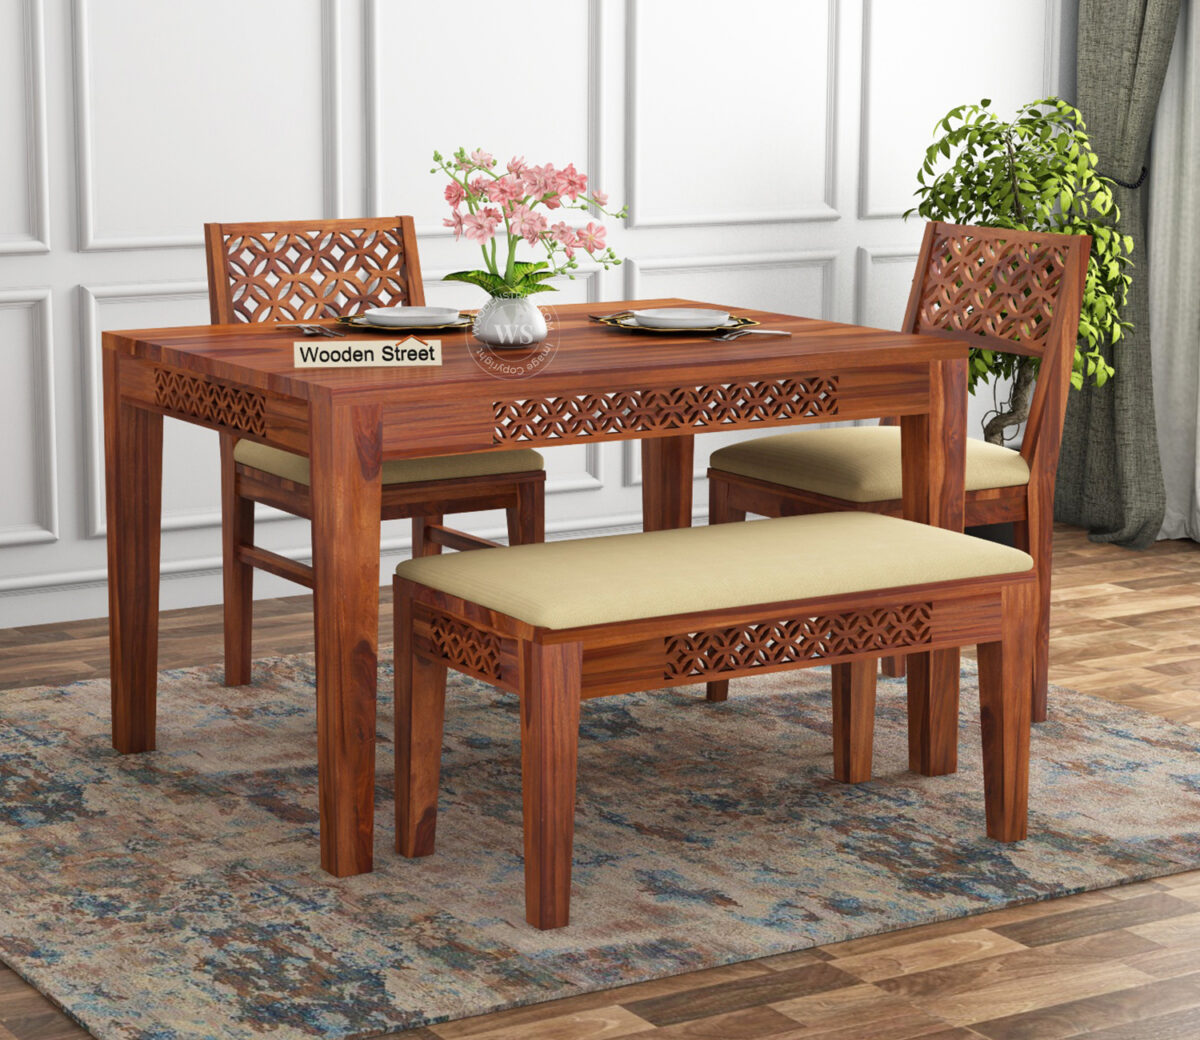 Types of Dining Table Sets Available on Wooden Street